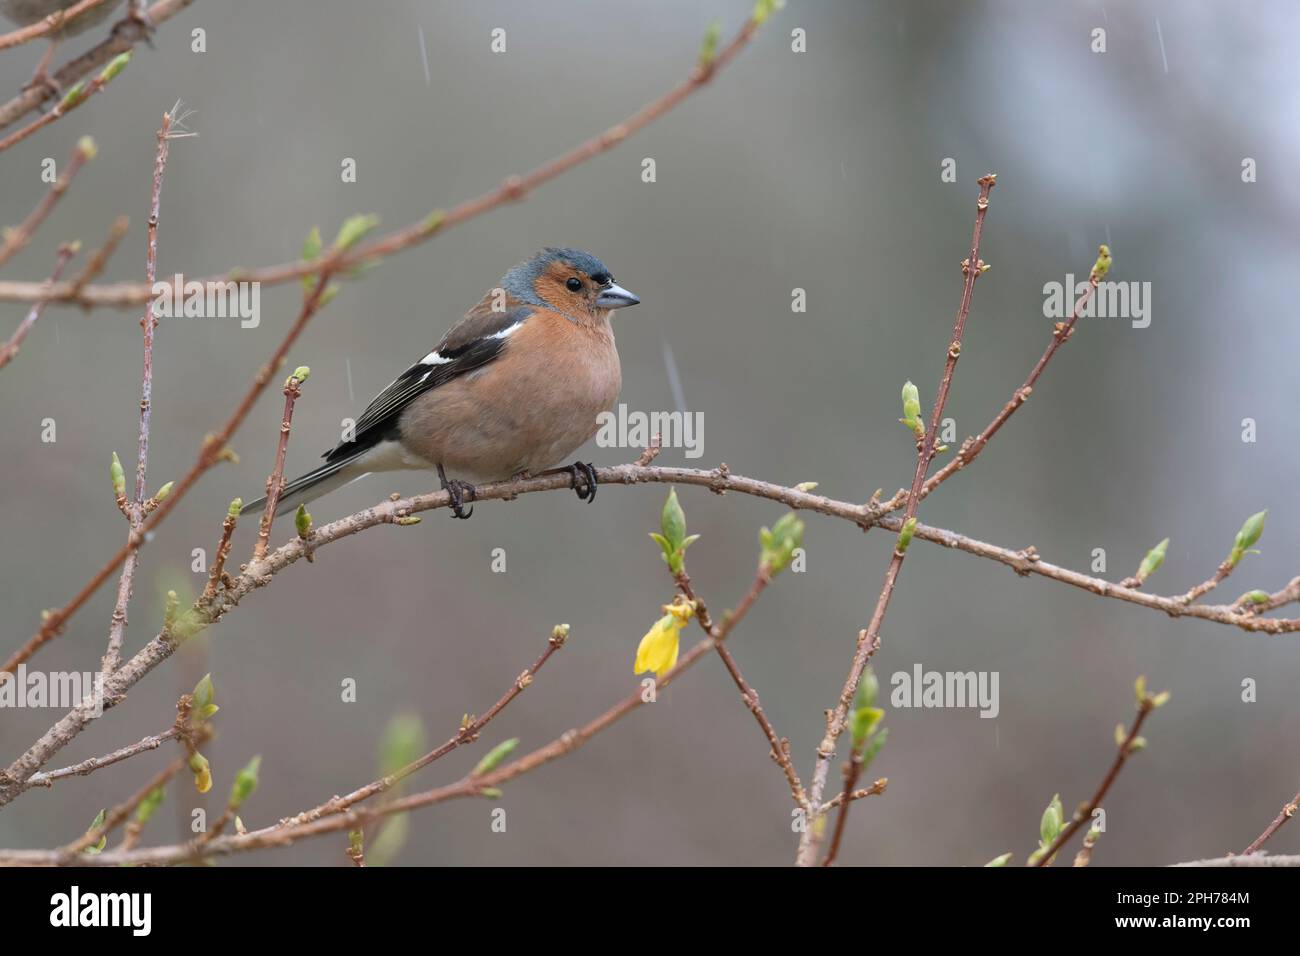 A Male Chaffinch (Fringilla Coelebs) Perched on a Forsythia Branch in Spring with Flowers and Buds Visible Stock Photo